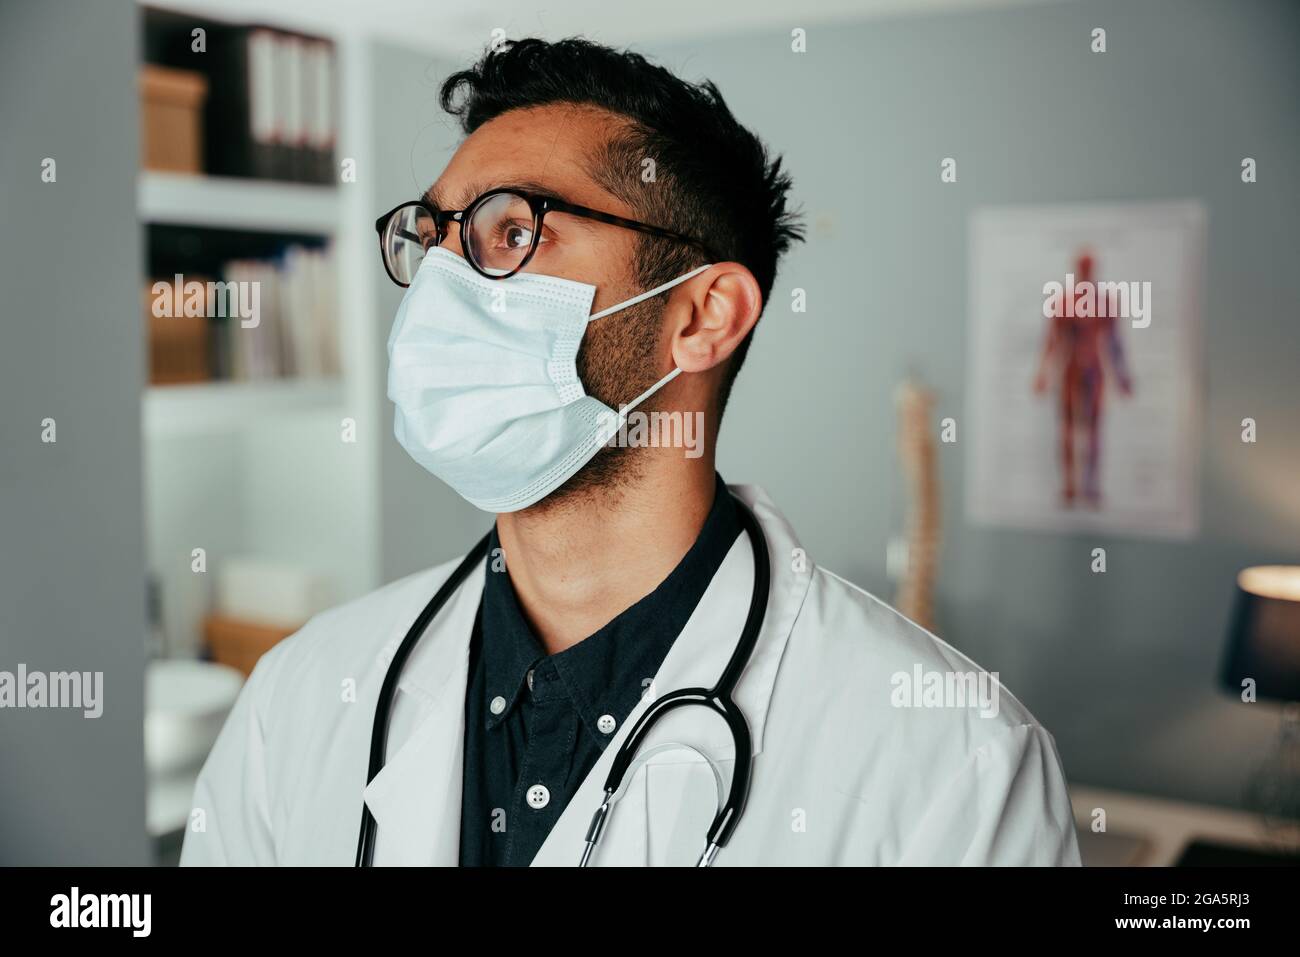 Mixed race male doctor working in clinic wearing surgical mask Stock Photo